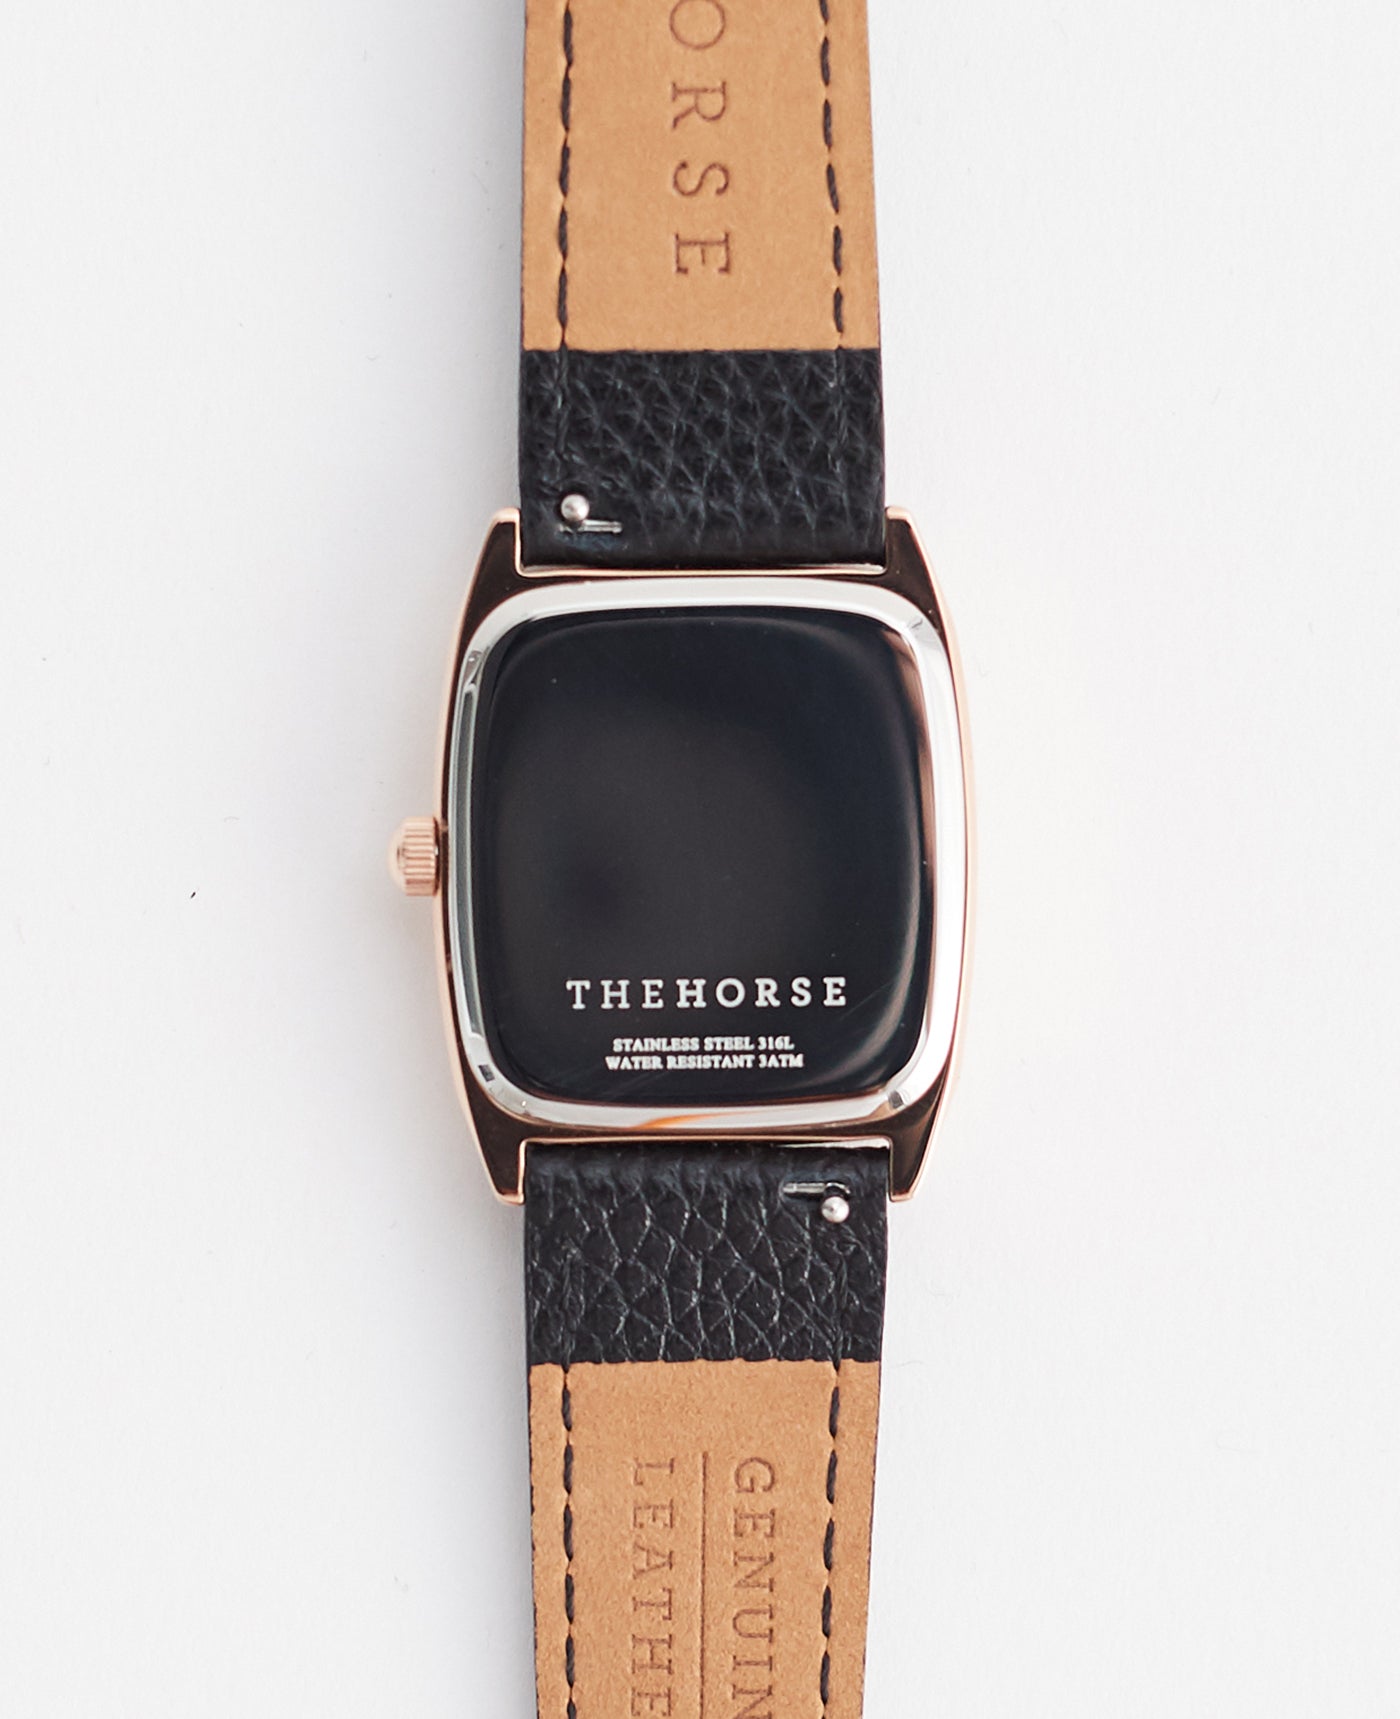 The Dress Watch: Rose Gold / White Dial / Black Leather